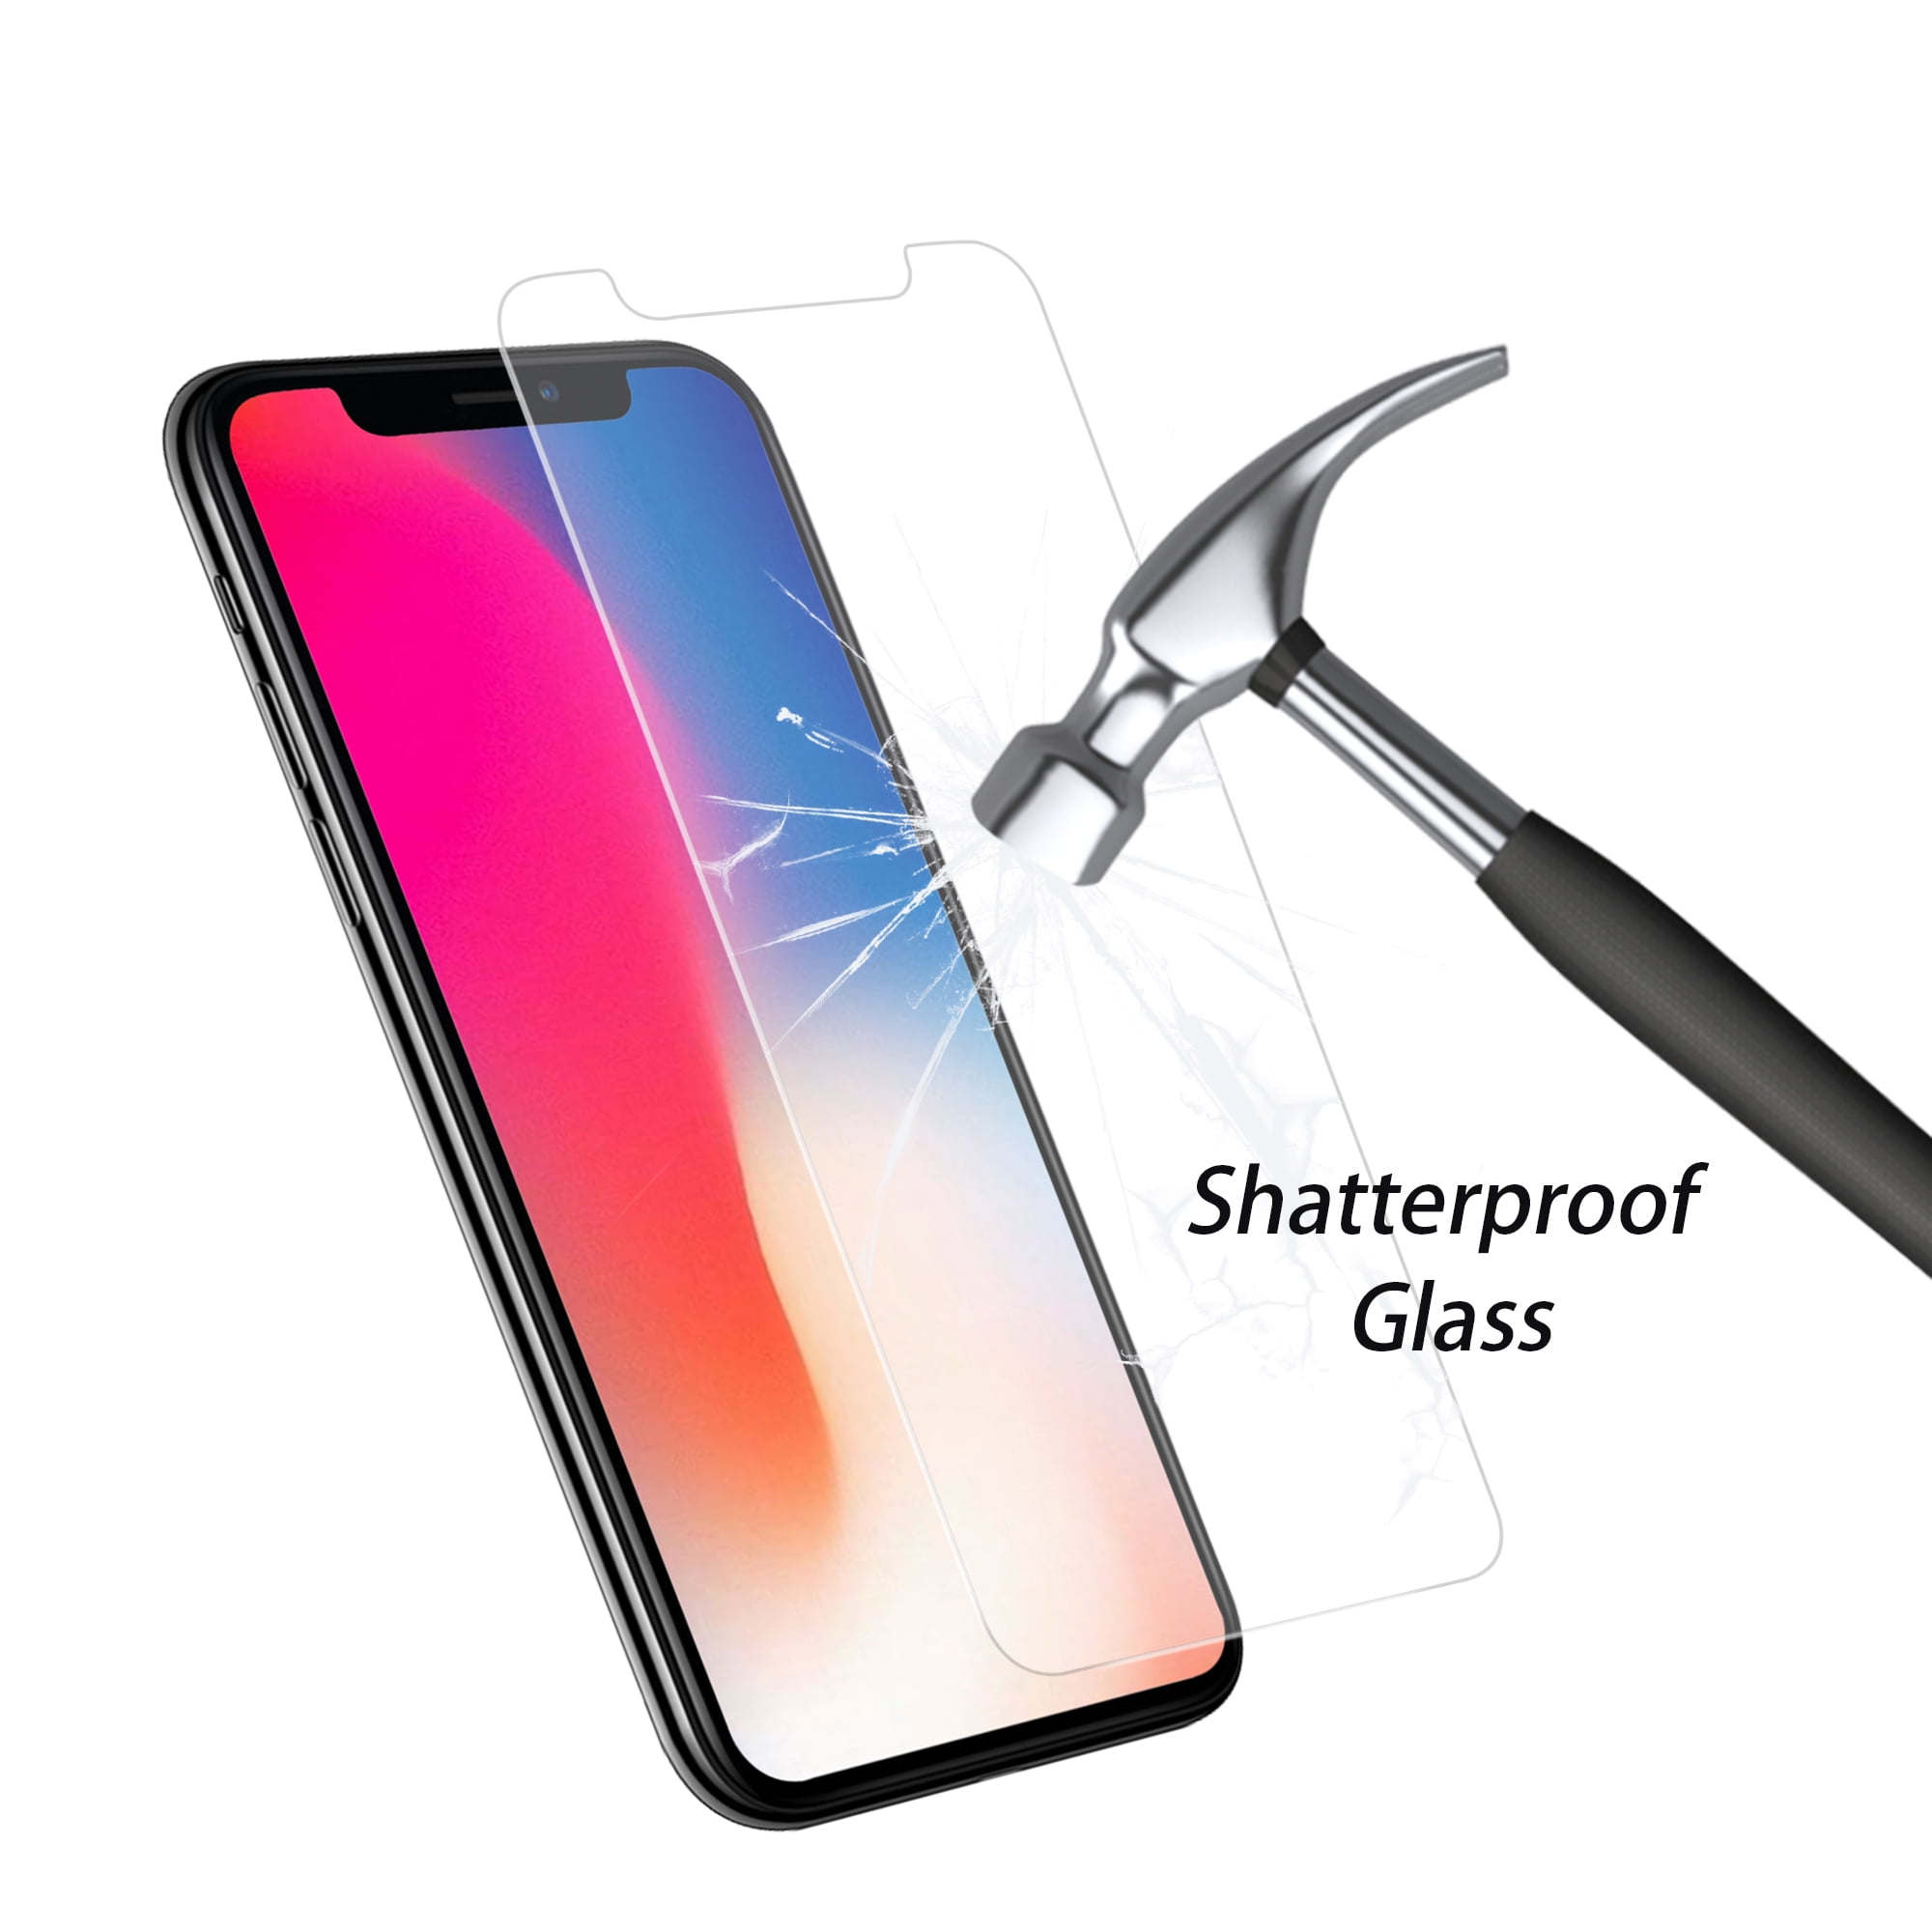 Retail Box] LOT 9H Hardness Tempered Glass Screen Protector iPhone X/XR/XS/MAX